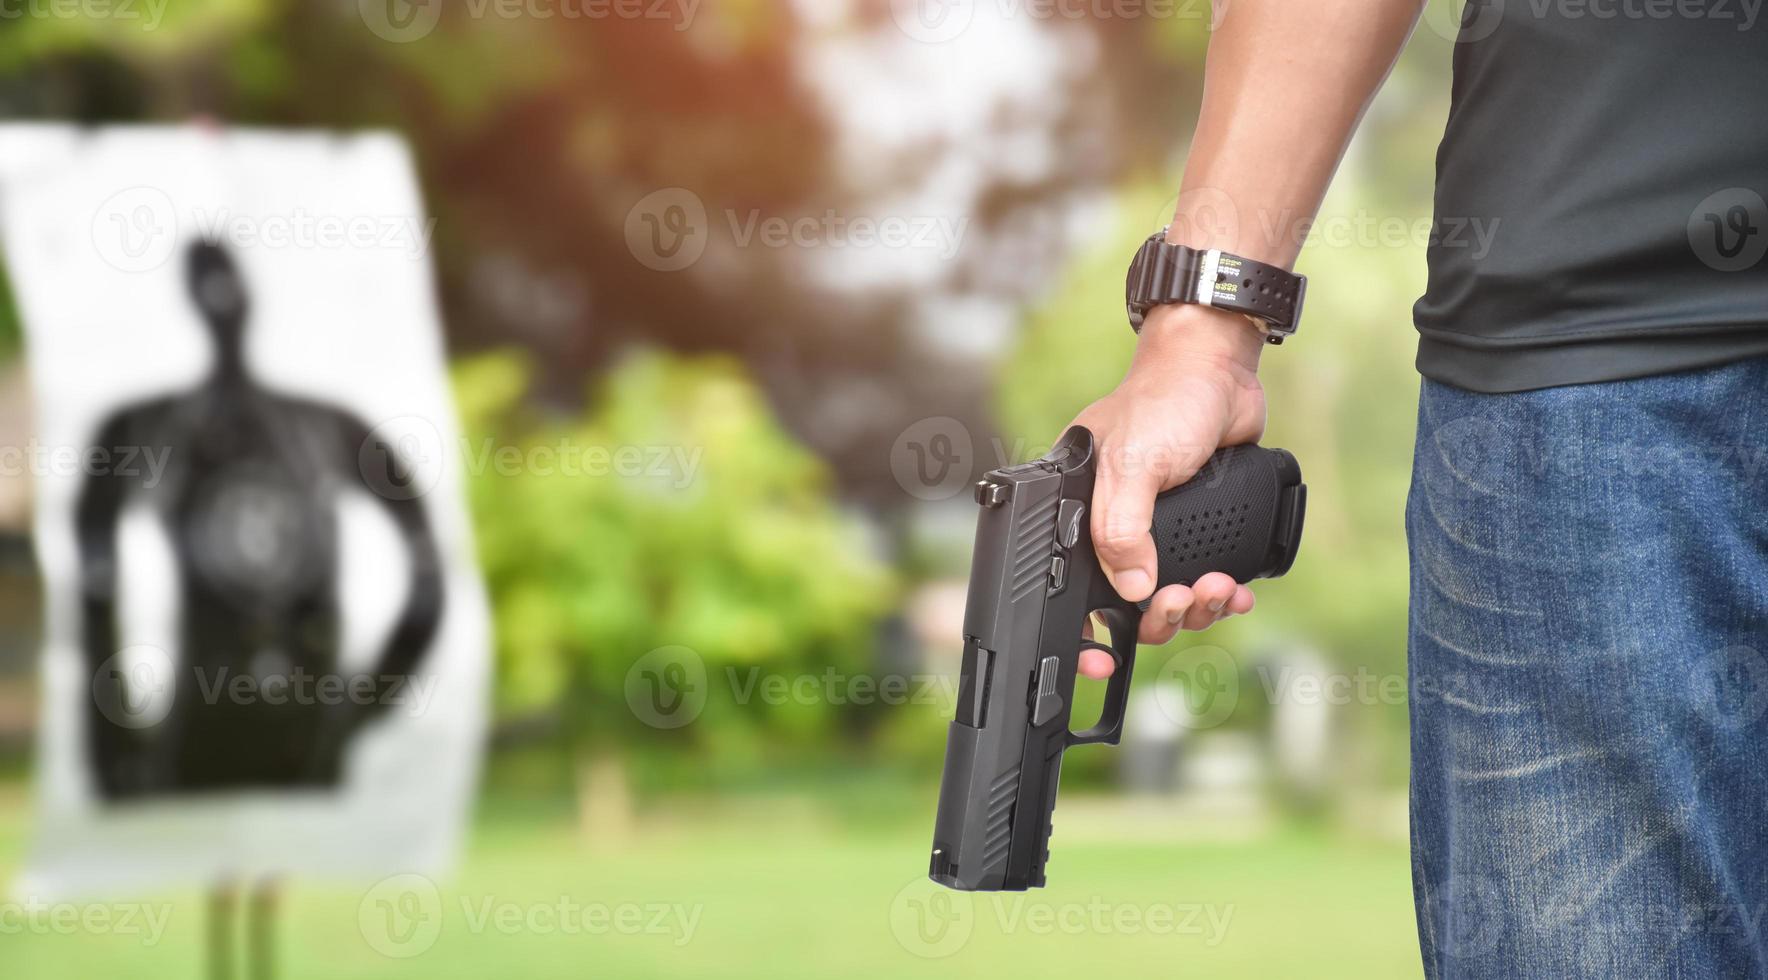 9mm automatic pistol holding in right hand of shooter, concept for security, robbery, gangster, bodyguard around the world. selective focus on pistol. photo